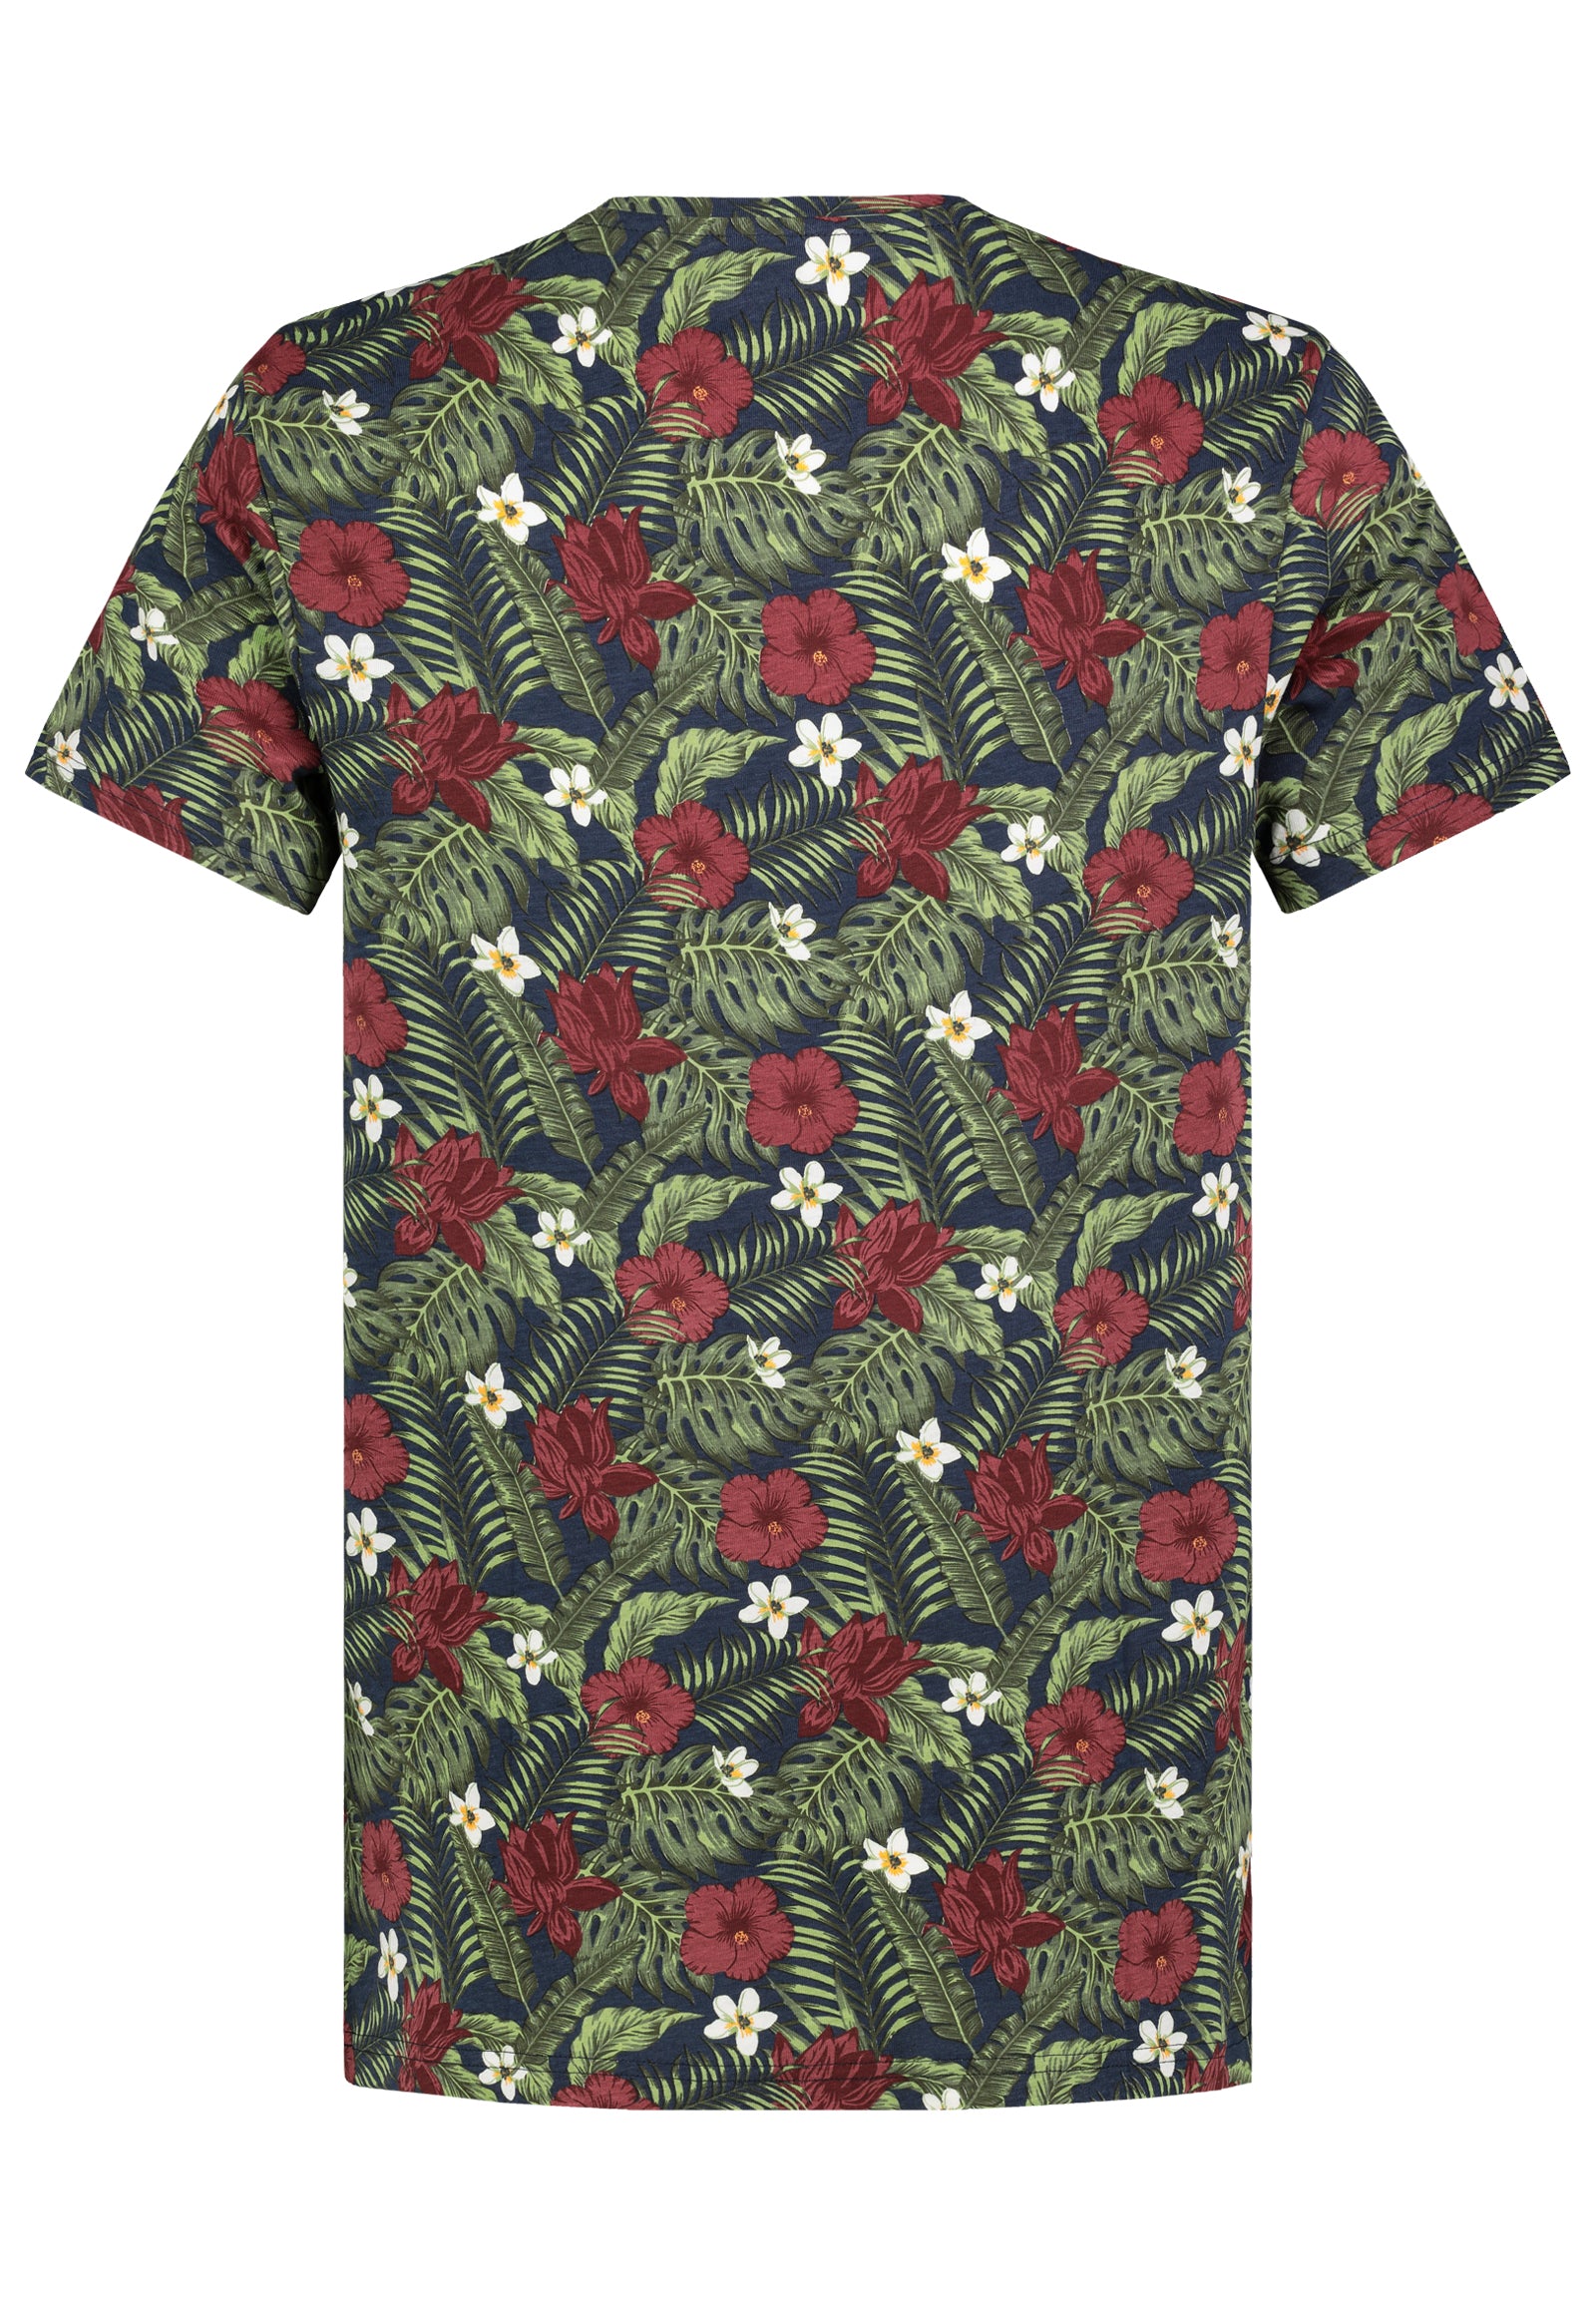 Pad&Pen | PPGary Tee | Tropical oly navy